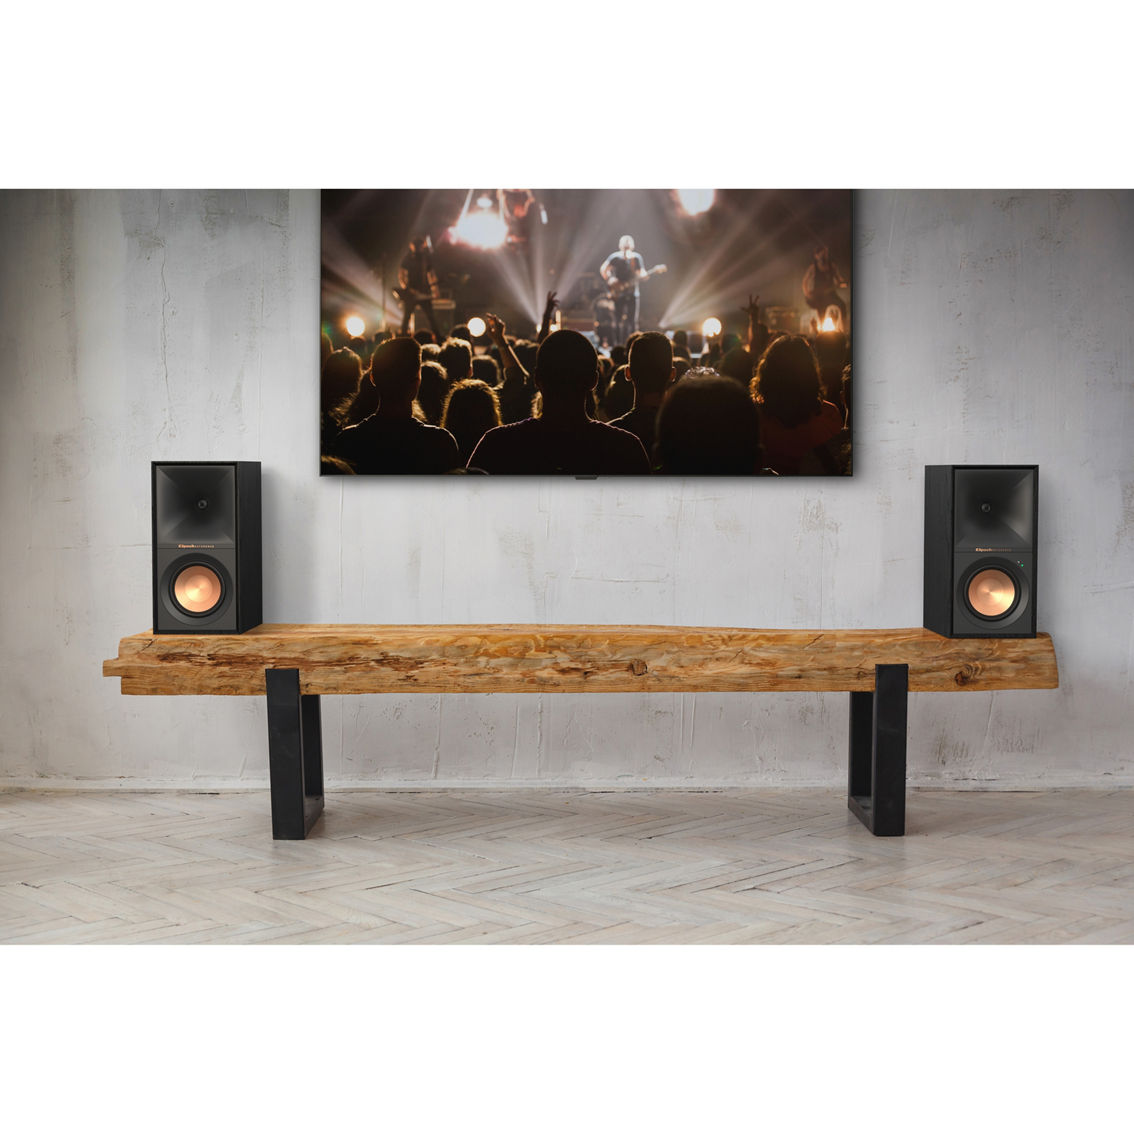 Klipsch R-50PM Powered Monitor Speakers with 5.25 in. Woofer - Image 5 of 8